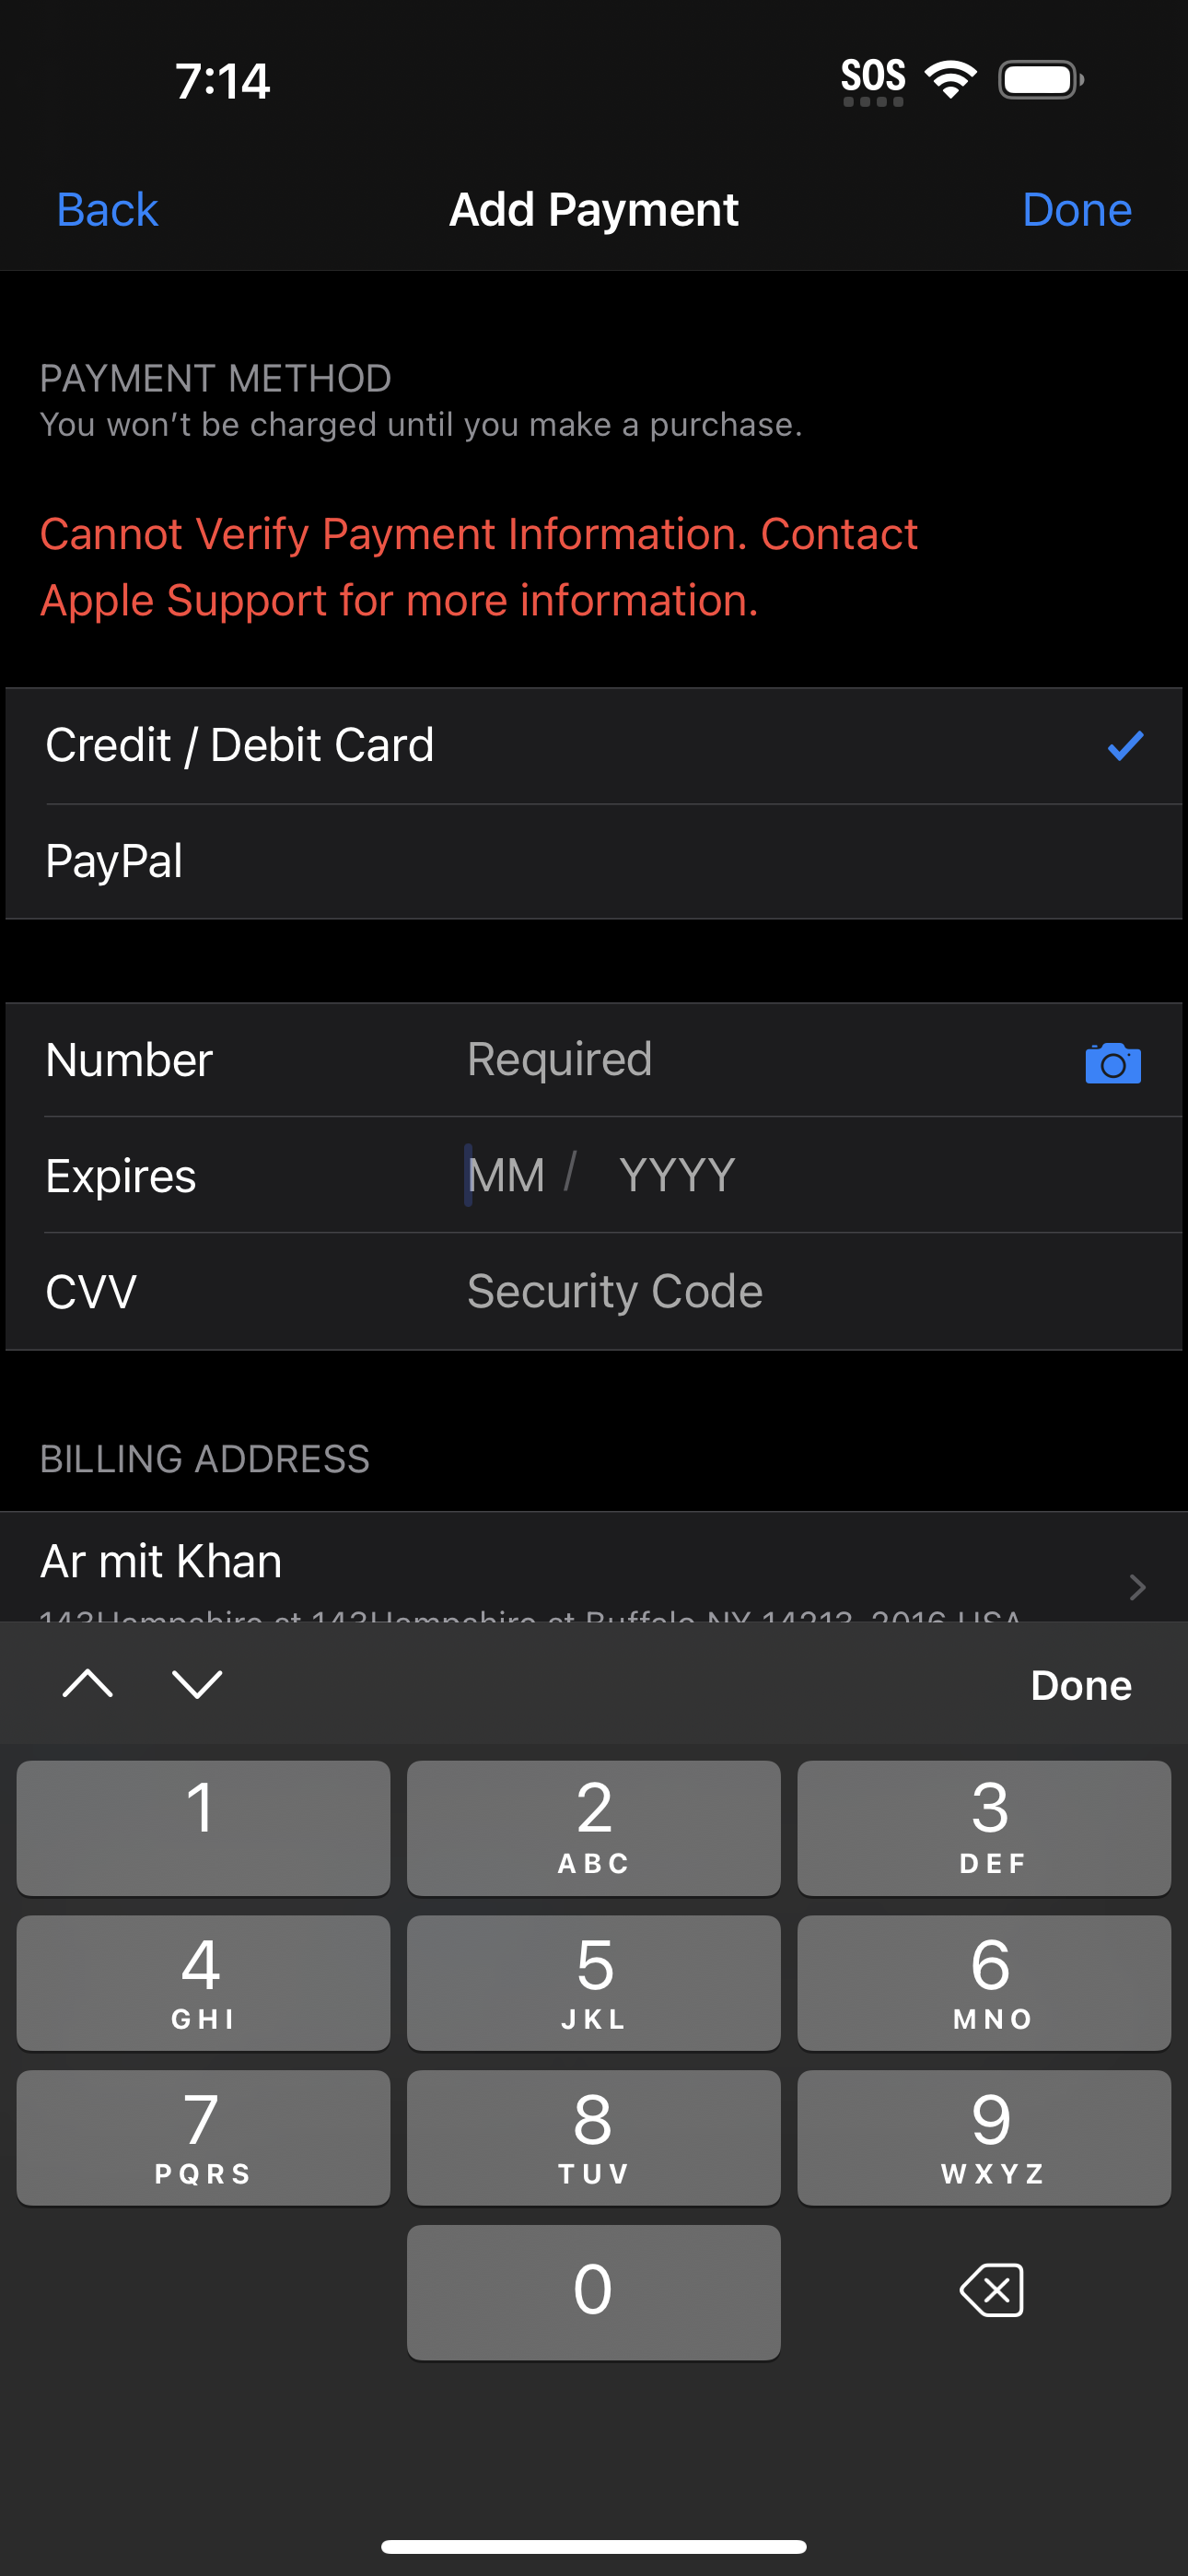 Why I cannot verify payment information - Apple Community